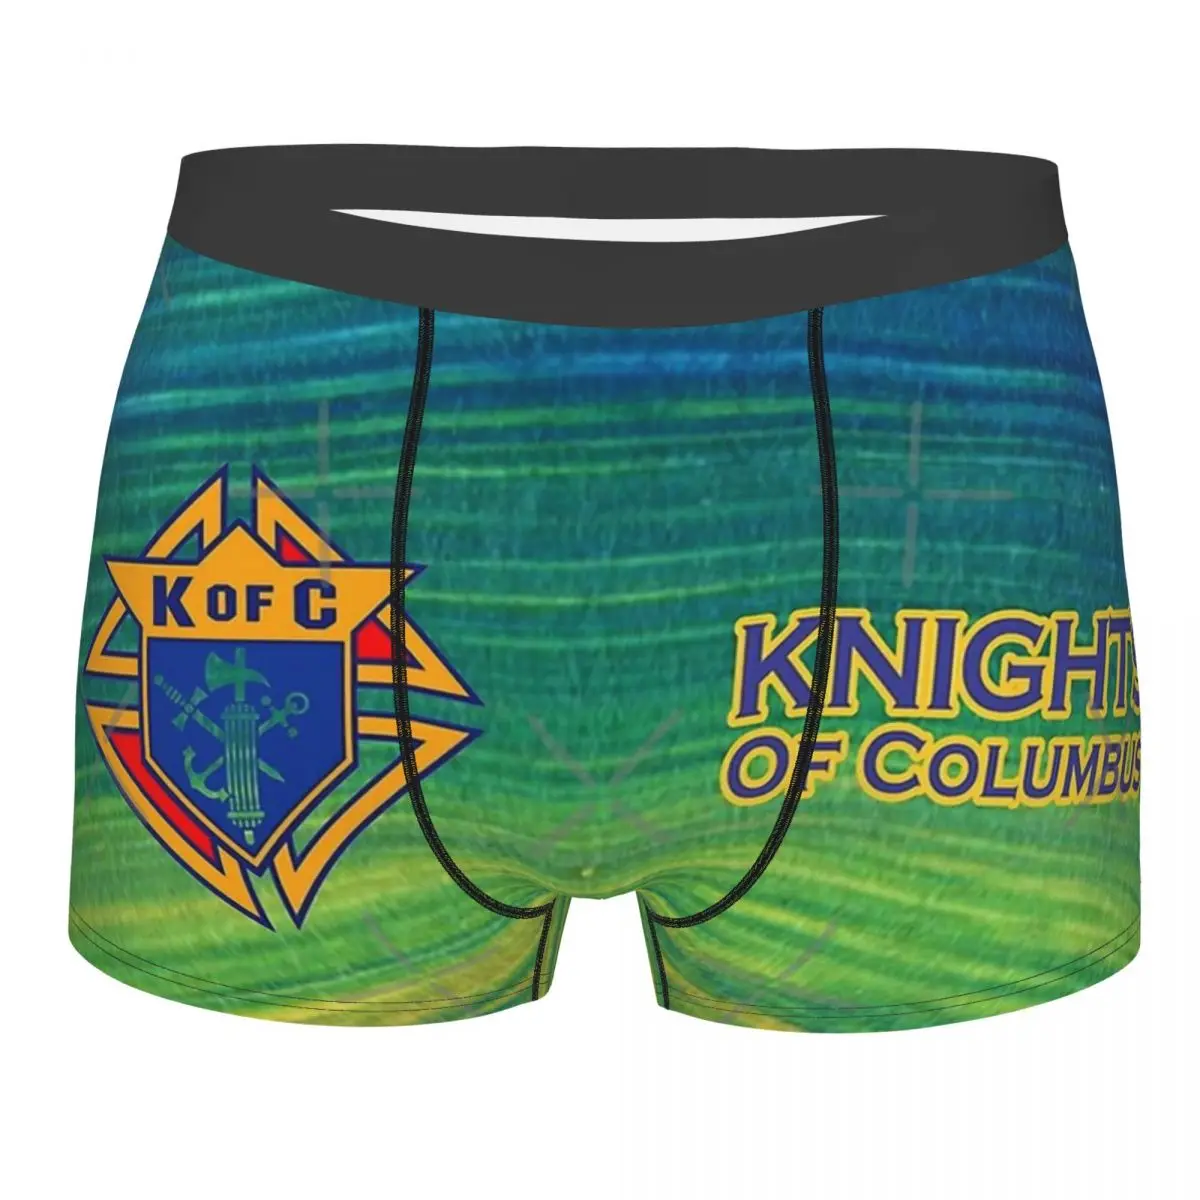 

Knights of Columbus Men's Panties KofC Knights Of Columbus Men Boxer Underwear Cotton for Male Large Size Lot Soft